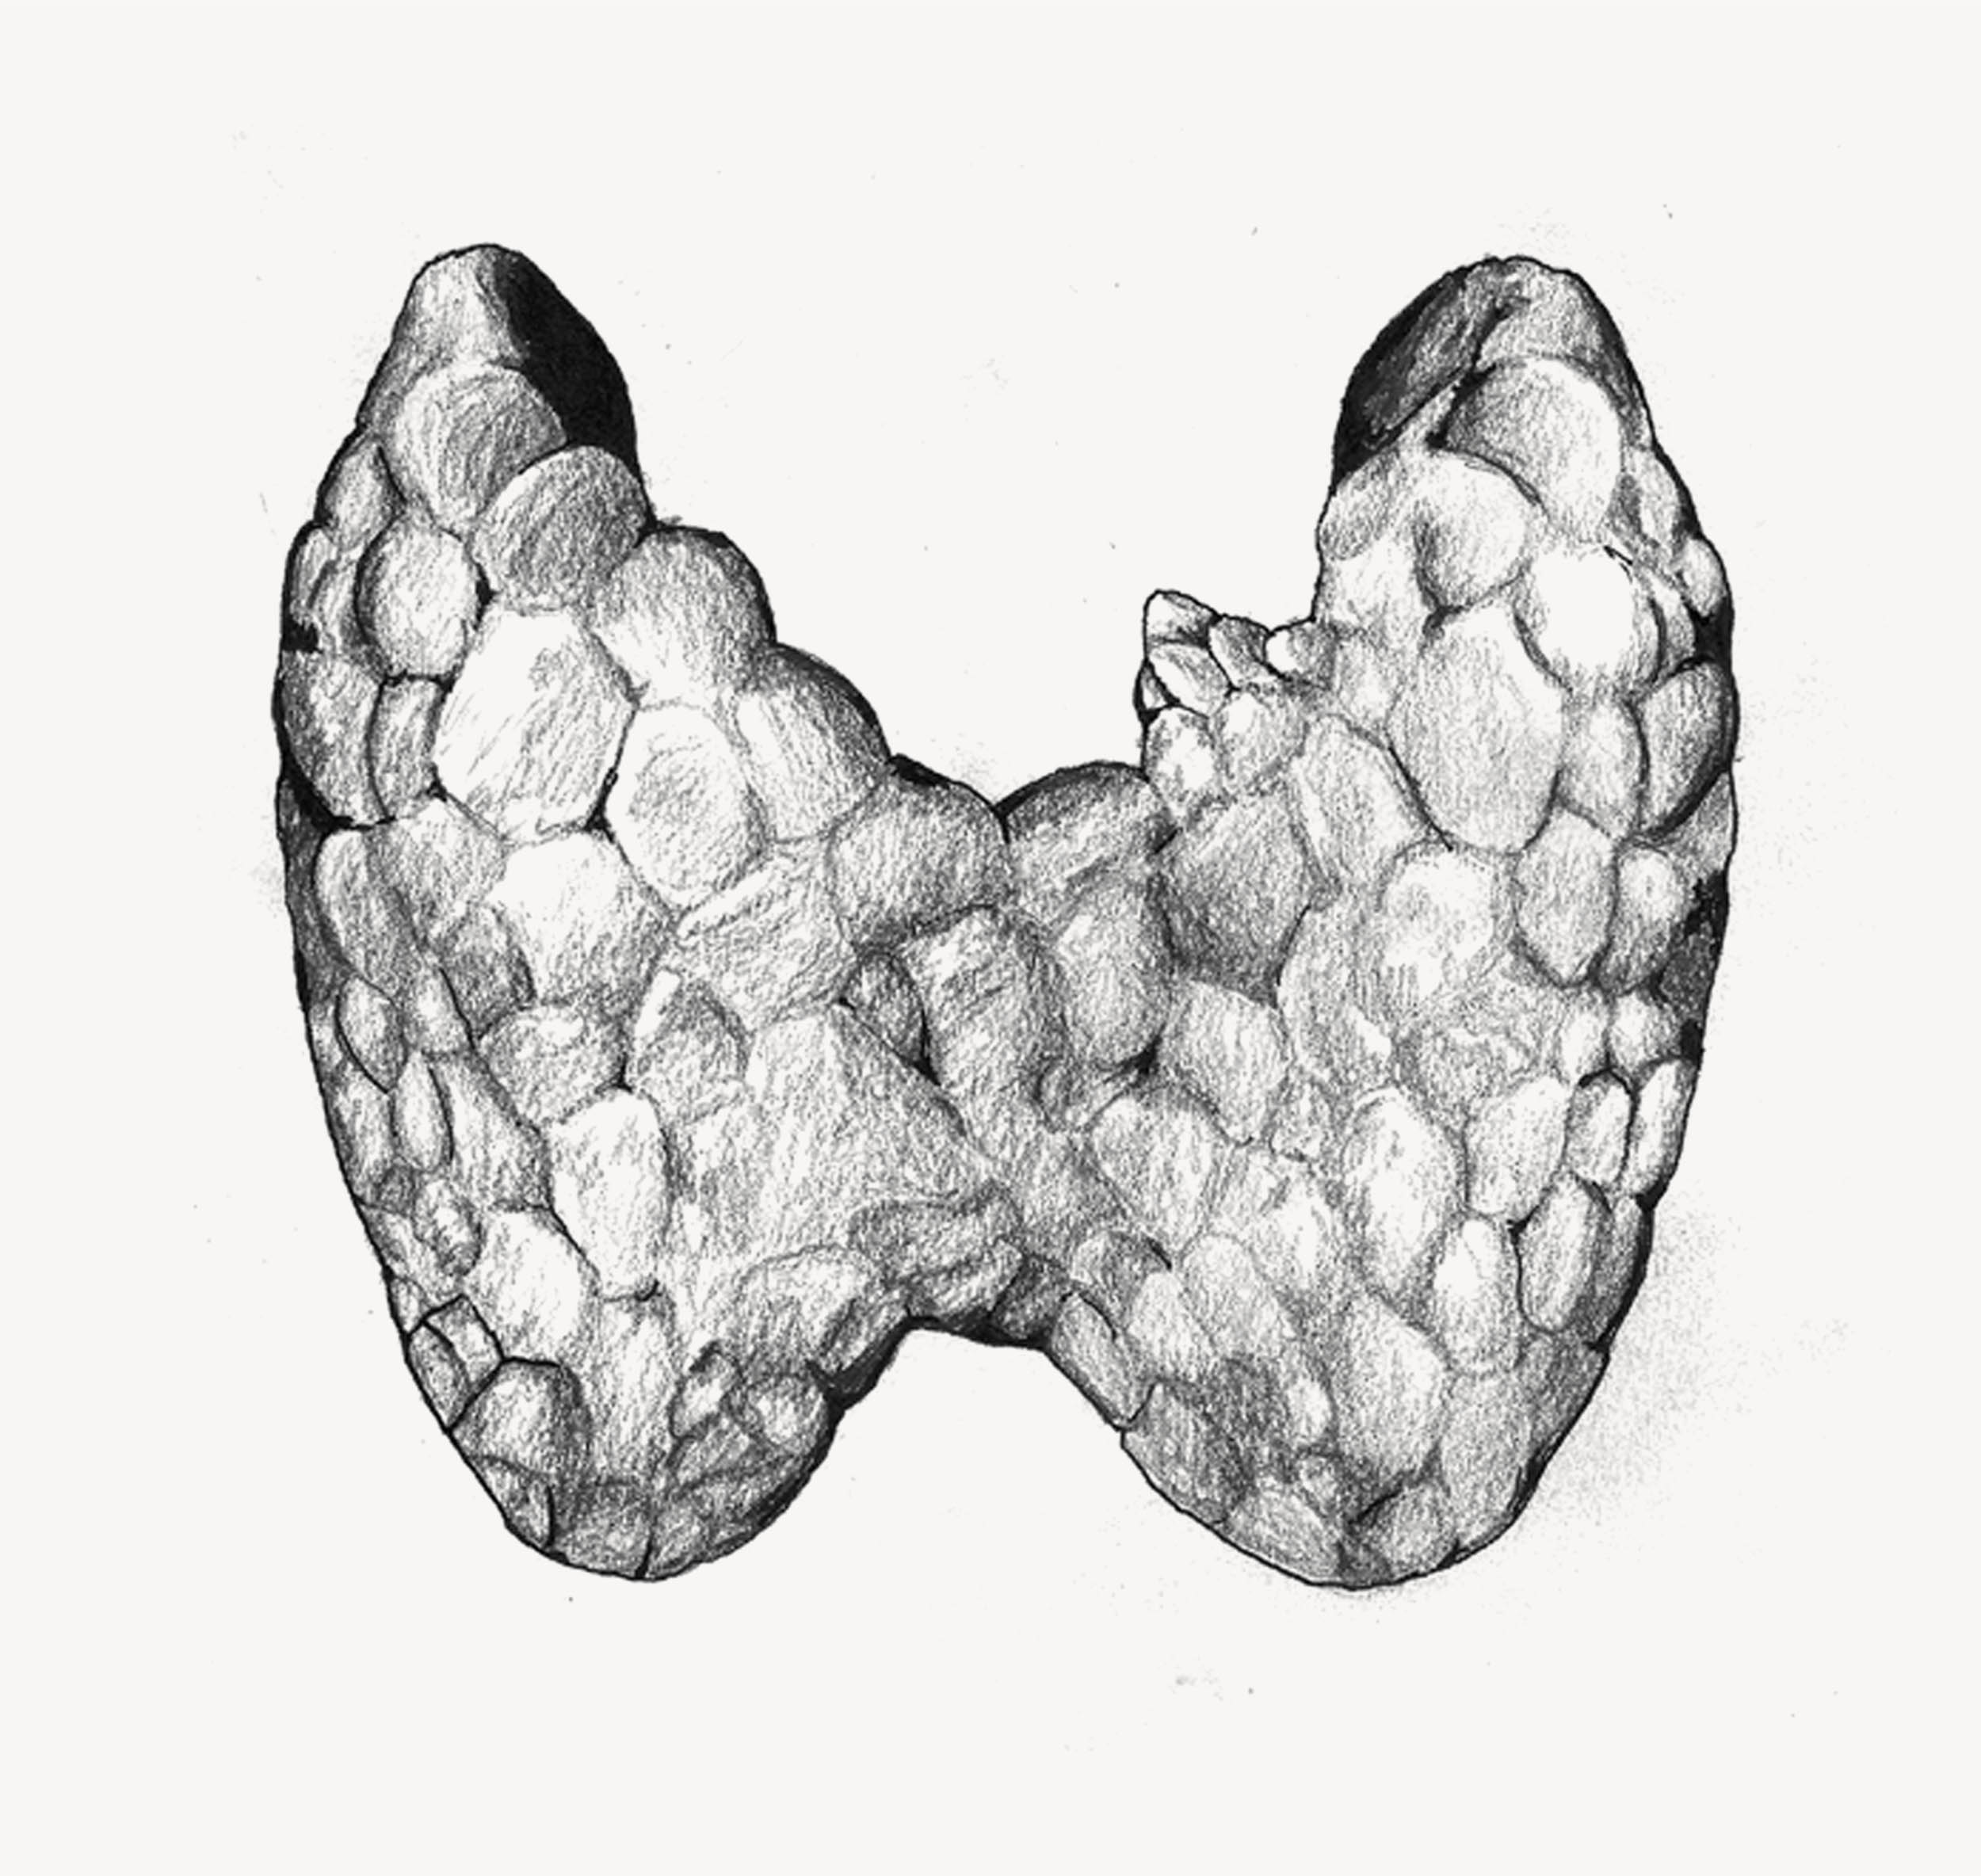 A pencil drawing of human lungs.